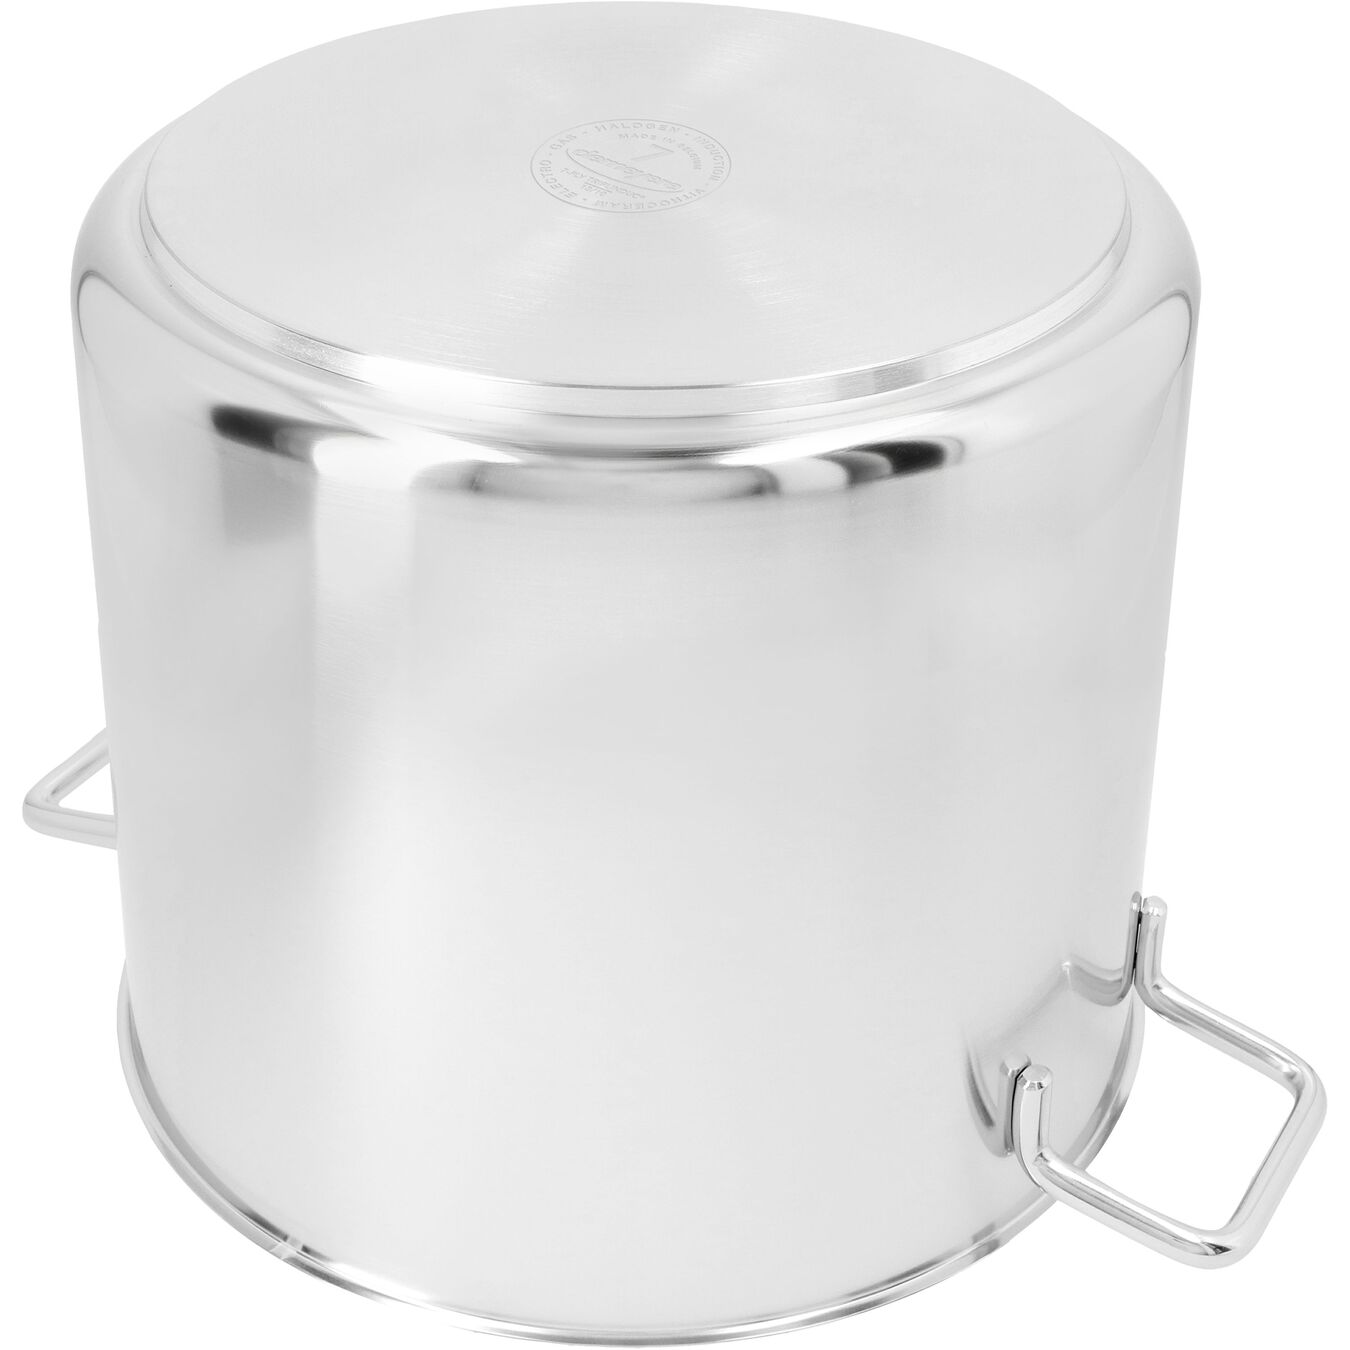 36 cm 18/10 Stainless Steel Stock pot with lid silver,,large 6